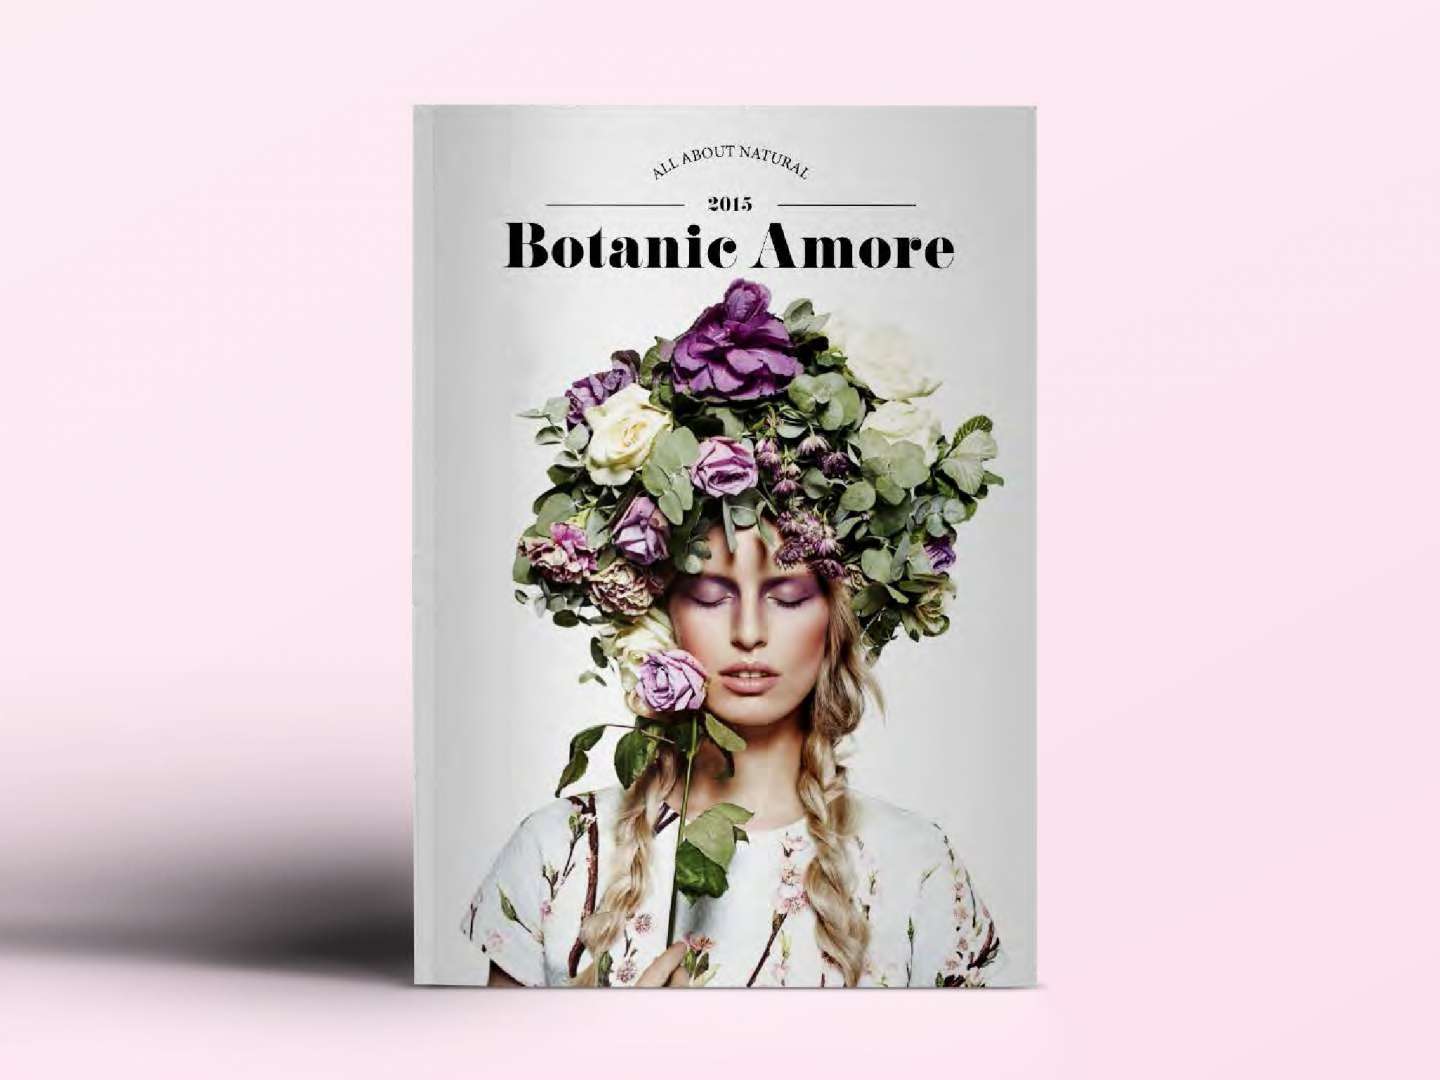 Botanic Amore – All about natural